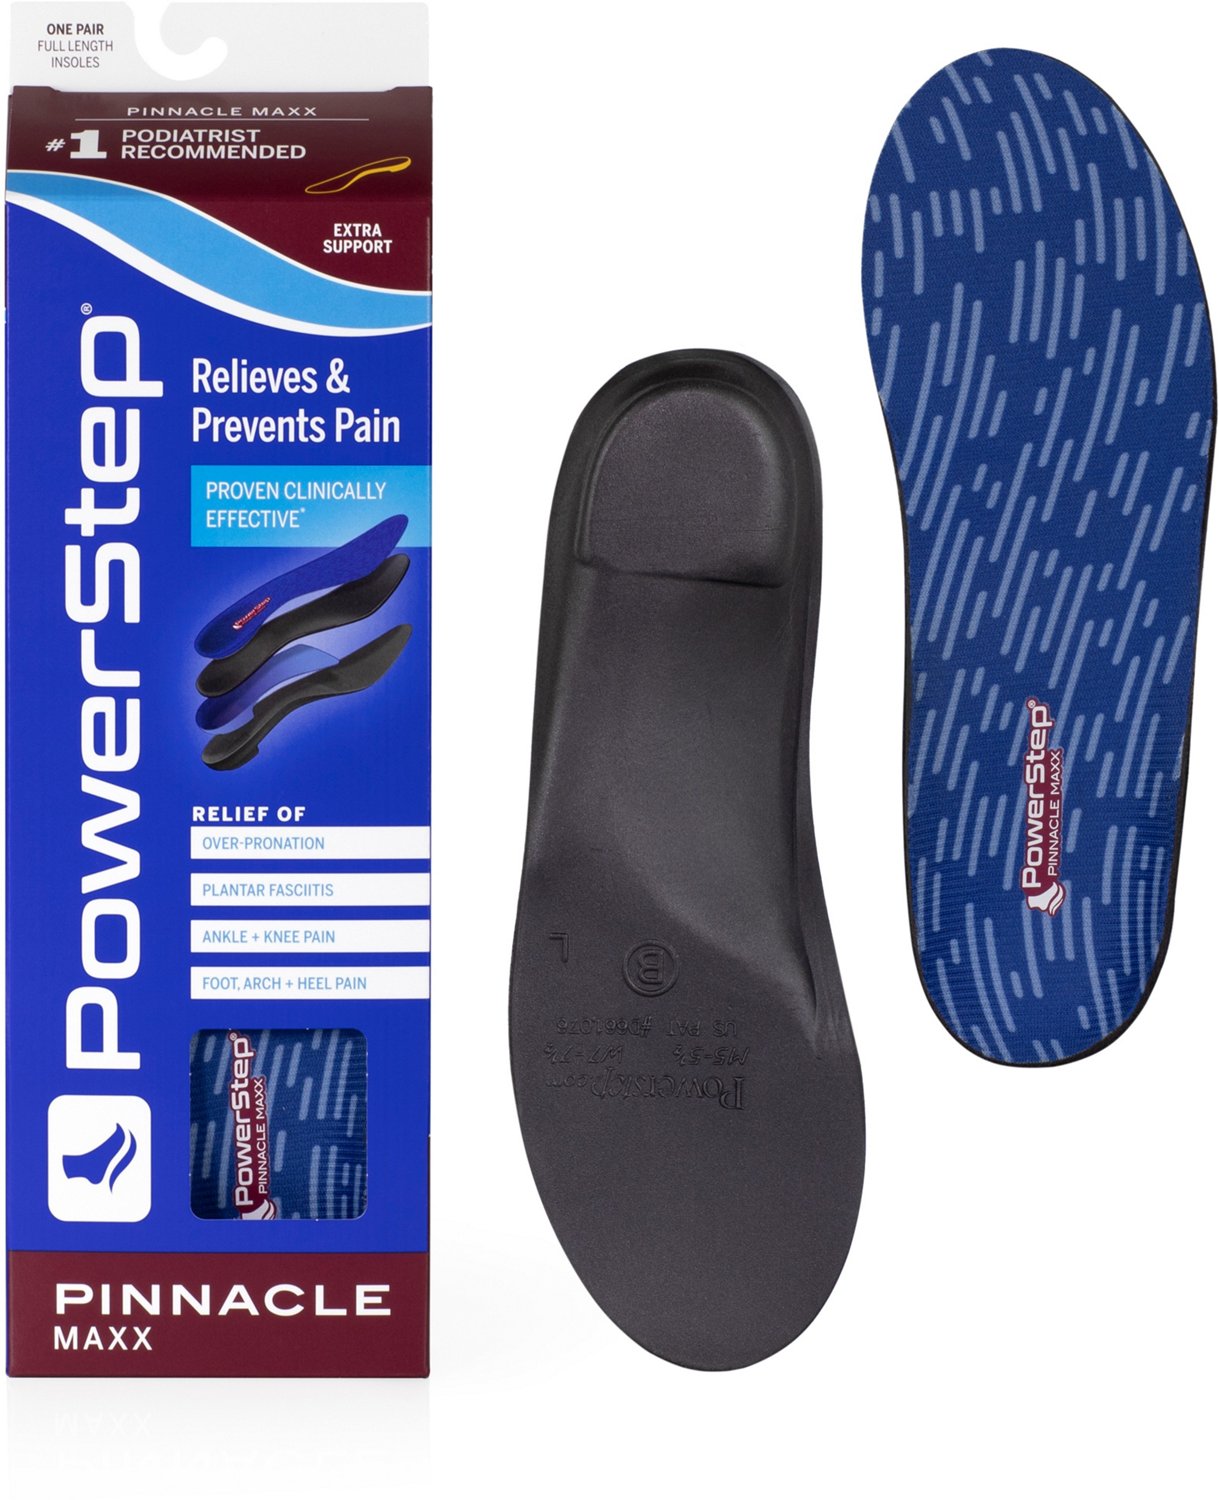 Powerstep Pinnacle Maxx Shoe Insoles | Free Shipping at Academy